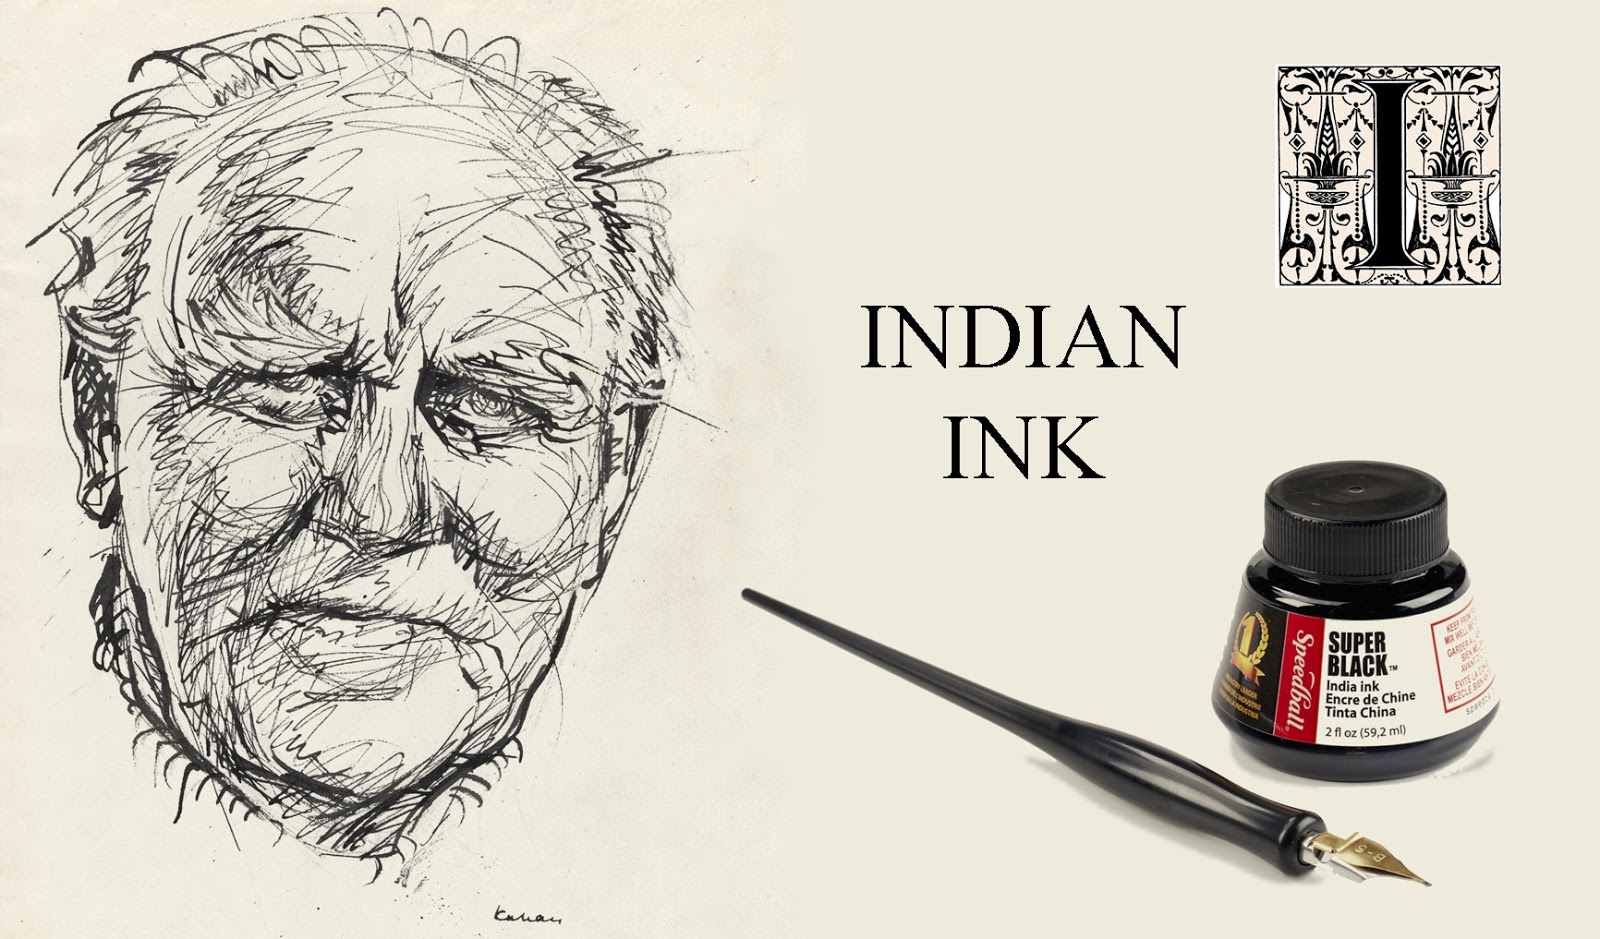 MAP: INDIAN INK